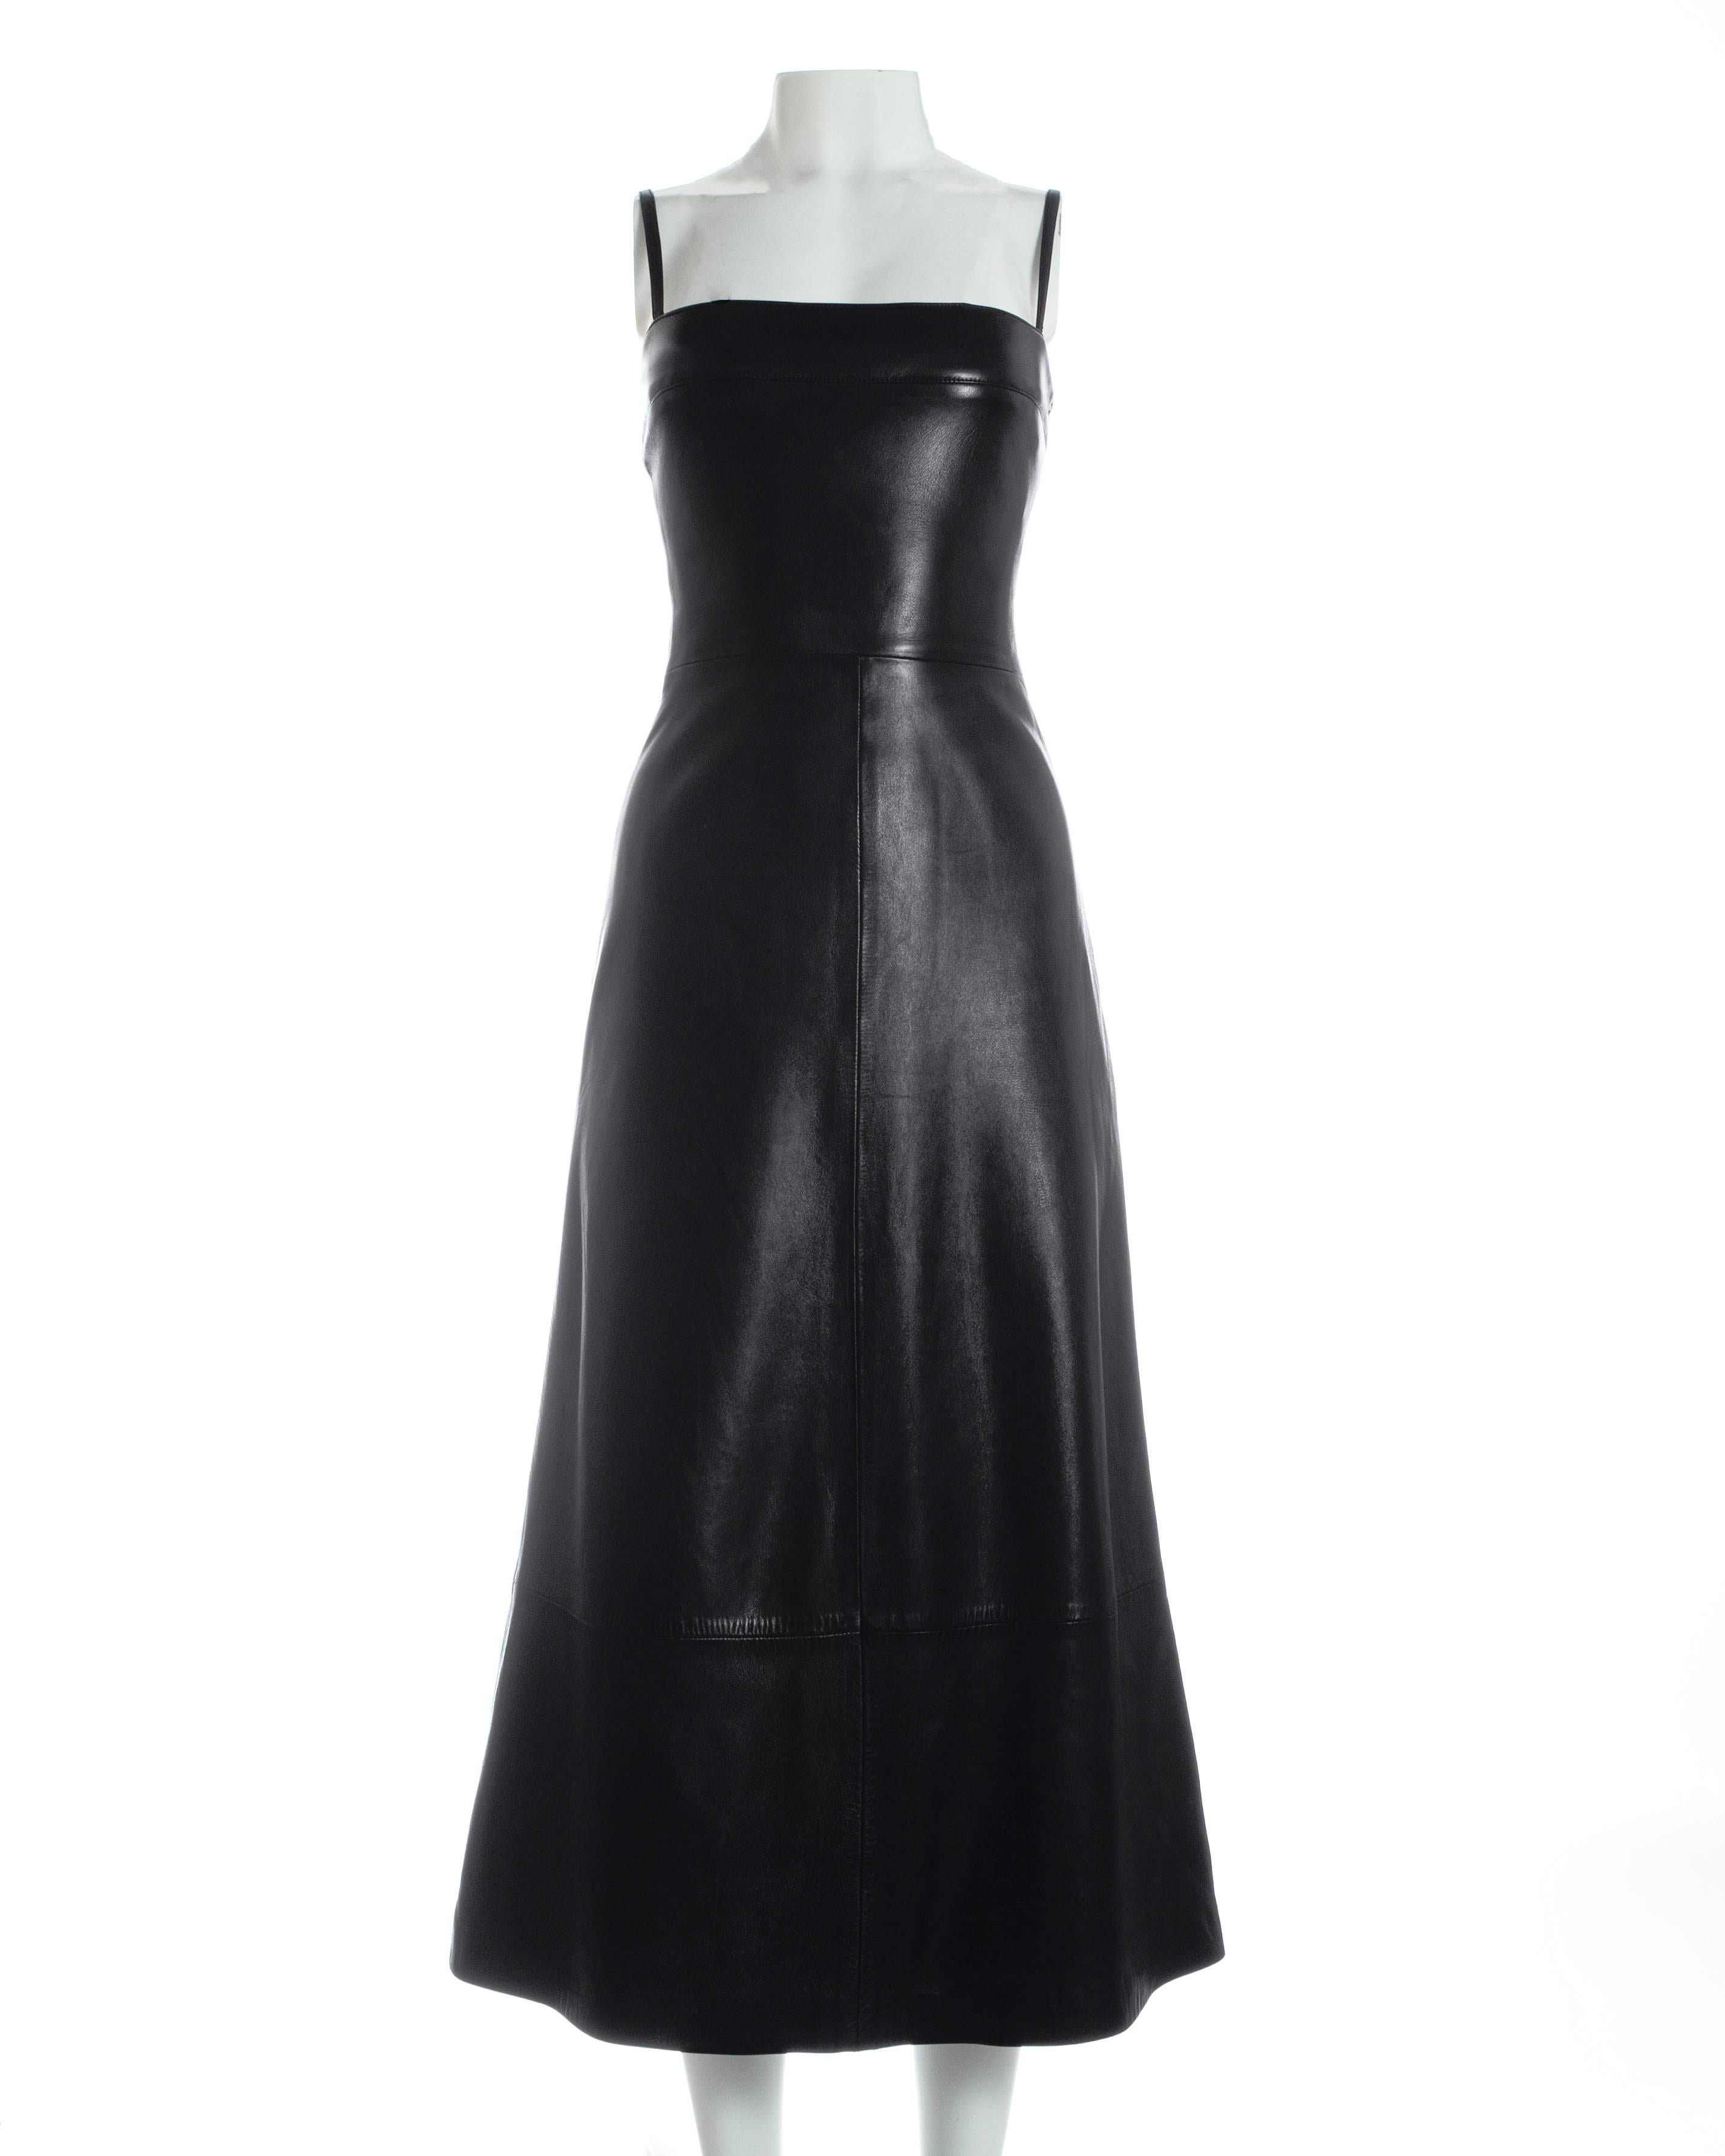 - Buttery soft black lambskin leather 
- Thin spaghetti straps
- Fully lined 
- Zip fastening 
- Fitted bust and waist
- A-line skirt finishing at the ankles 

Ca. 1998